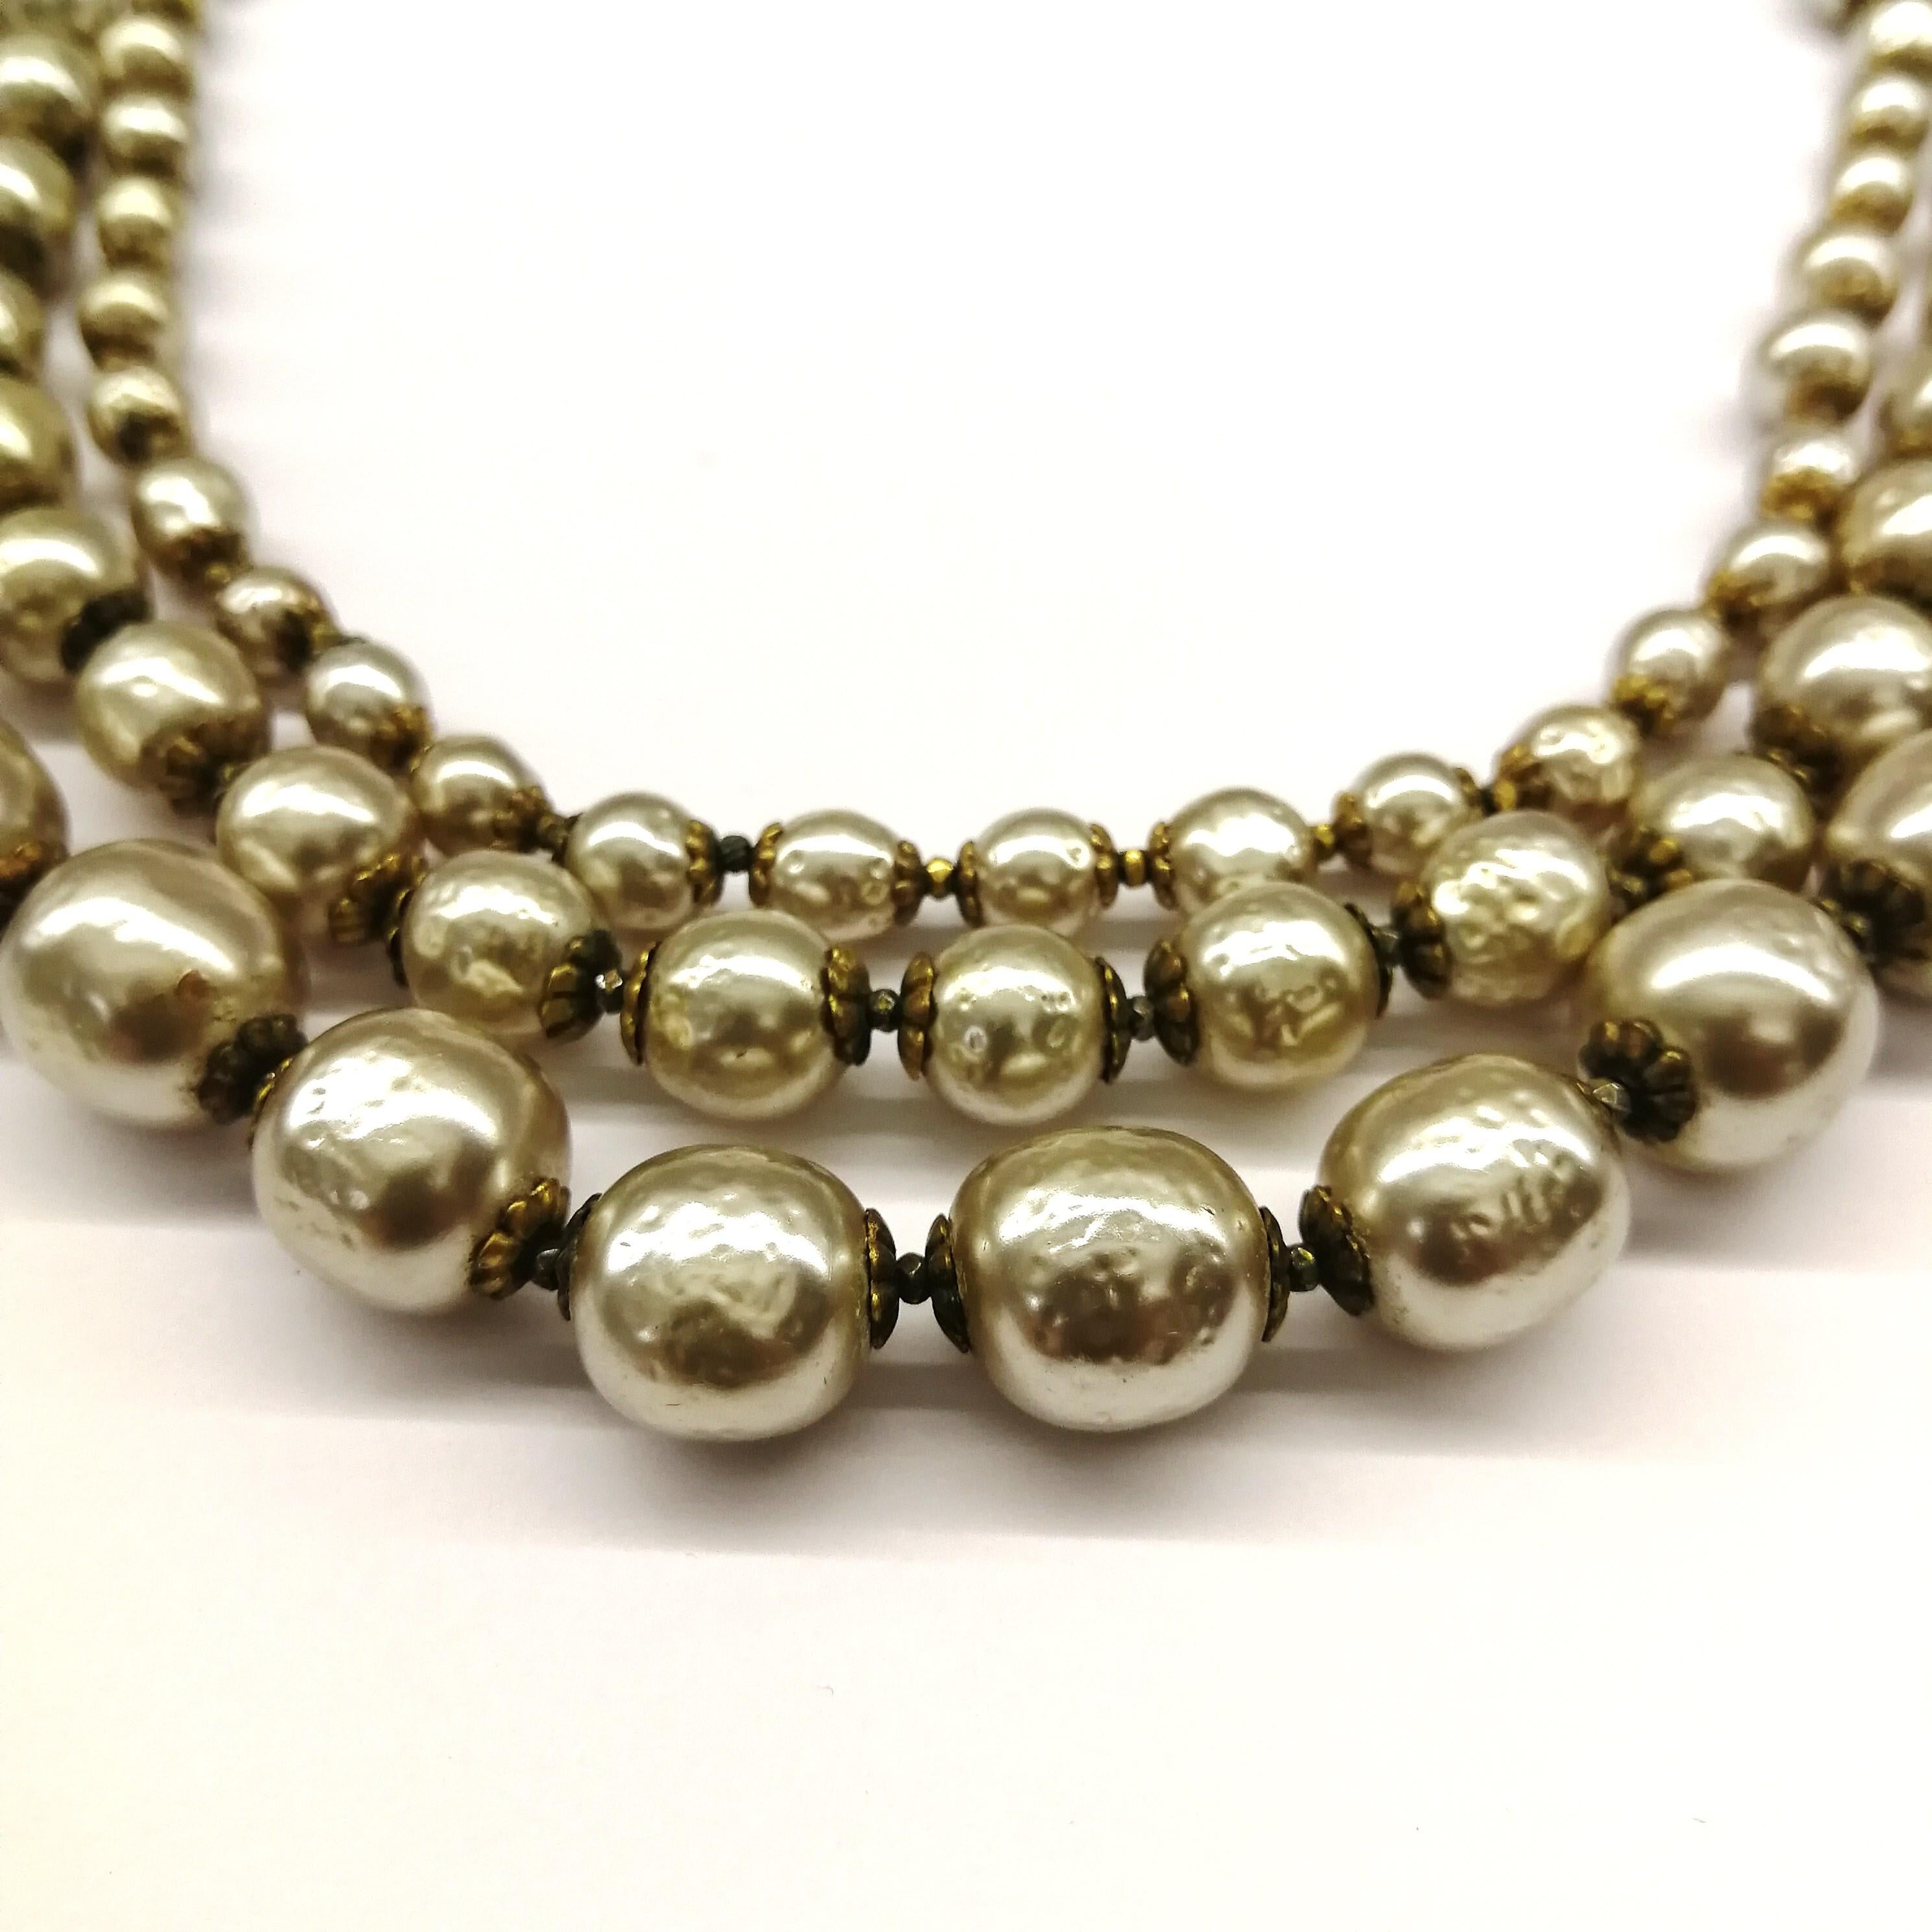 Women's A baroque pearl and iridescent paste three row necklace, Miriam Haskell, 1950s